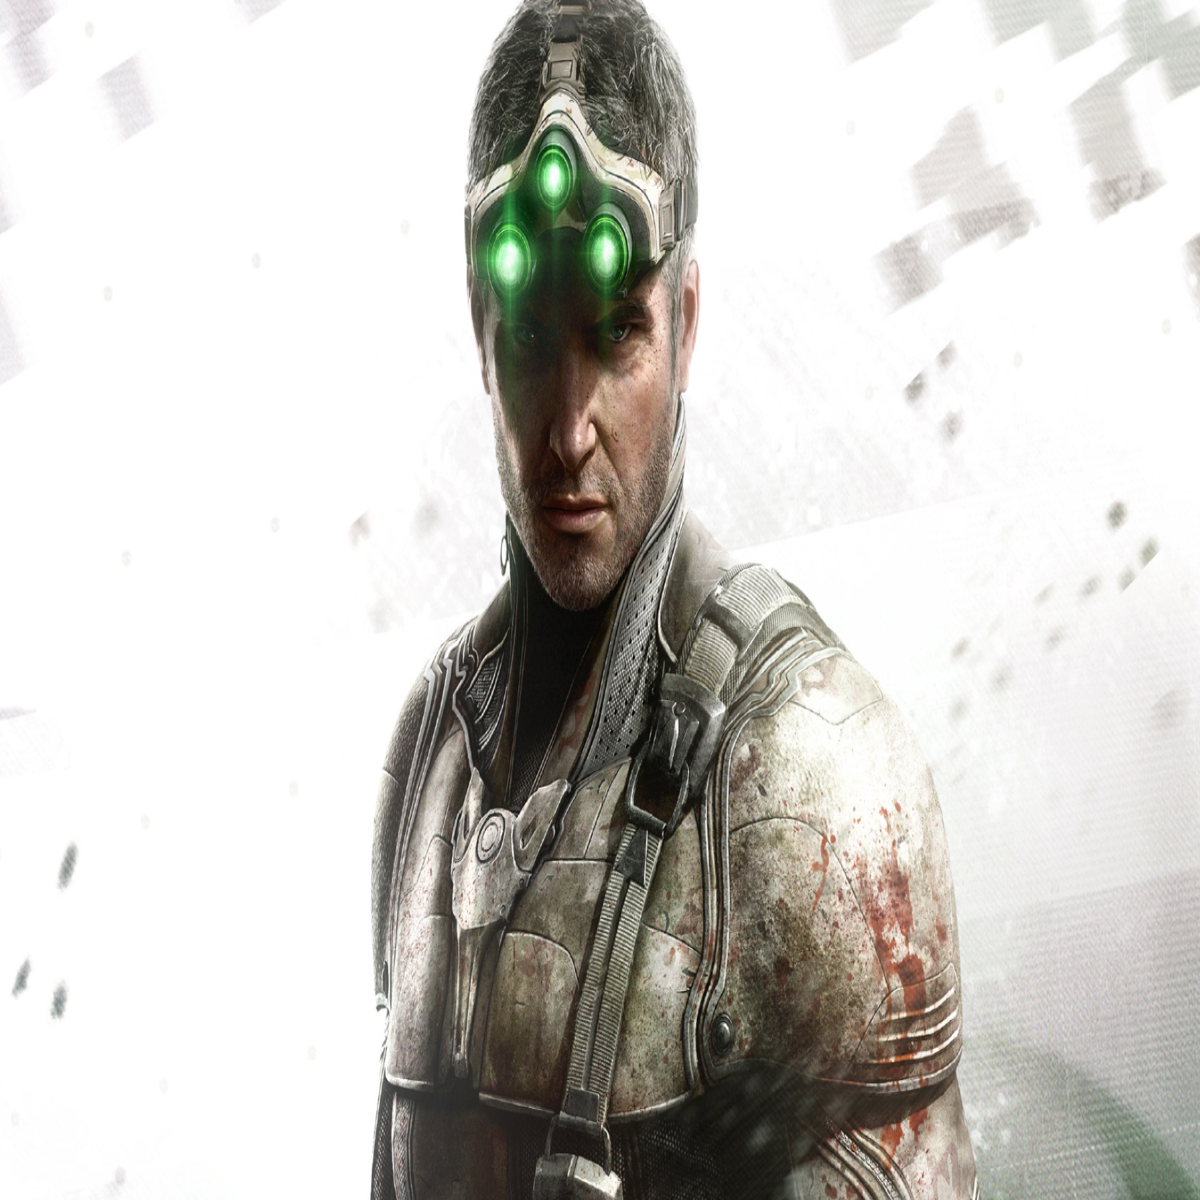 Splinter Cell remake teases 'photorealistic' graphics